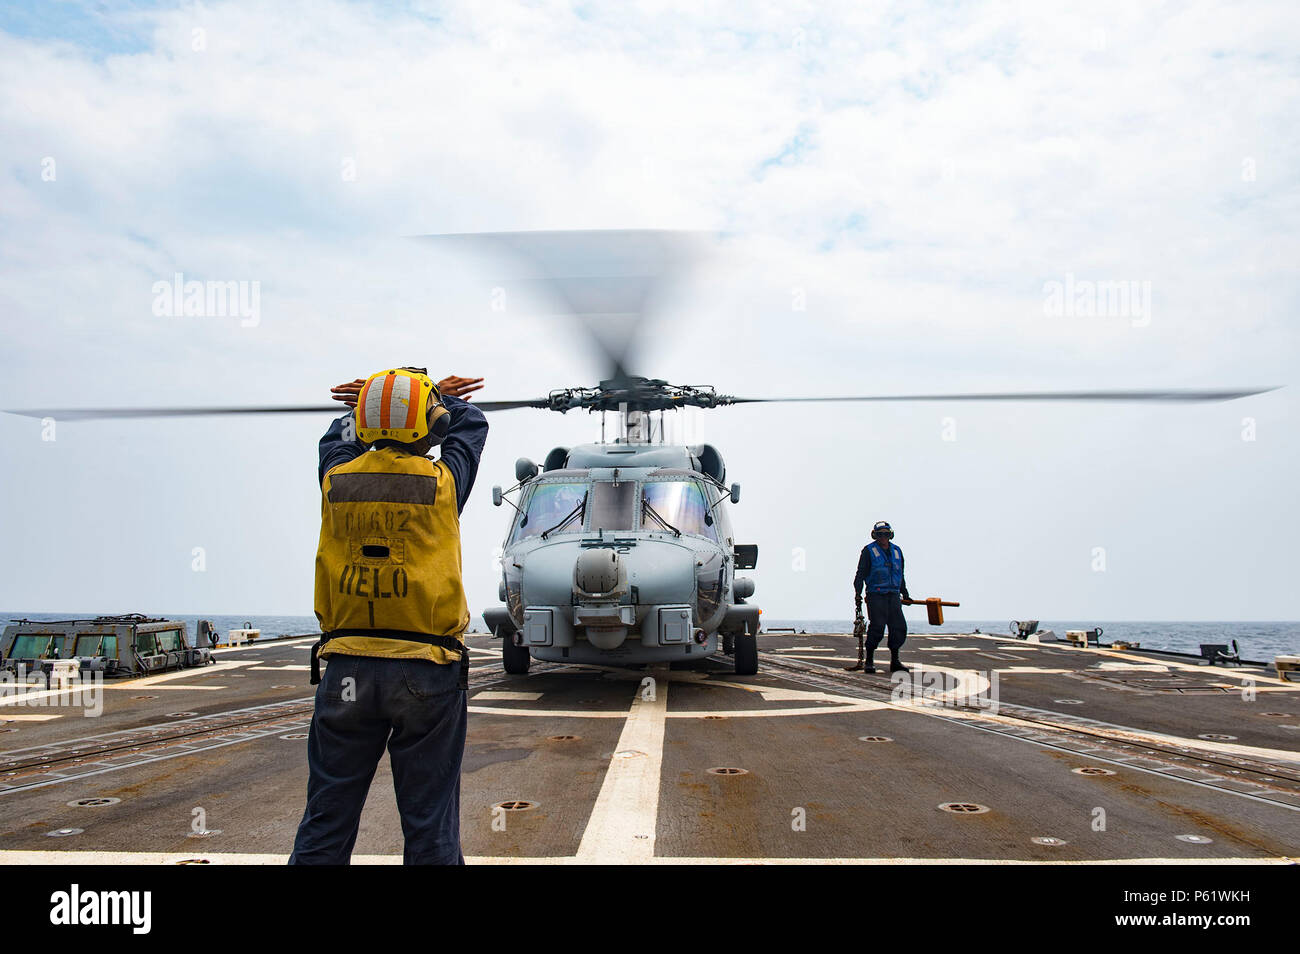 160406-N-MD297-053 PACIFIC OCEAN (April 6, 2016) - Logistics Specialist Seaman Sanndra Ton, assigned to the Arleigh Burke-class guided-missile destroyer USS Lassen (DDG 82), signals an MH-60R helicopter from the 'Jaguars' of Helicopter Maritime Strike Squadron (HSM) 60 that the chocks and chains have been removed from the helicopter. Lassen is currently underway in support of Operation Martillo, a joint operation with the U.S. Coast Guard and partner nations within the 4th Fleet area of responsibility. Operation Martillo is being led by Joint Interagency Task Force South, in support of U.S. So Stock Photo